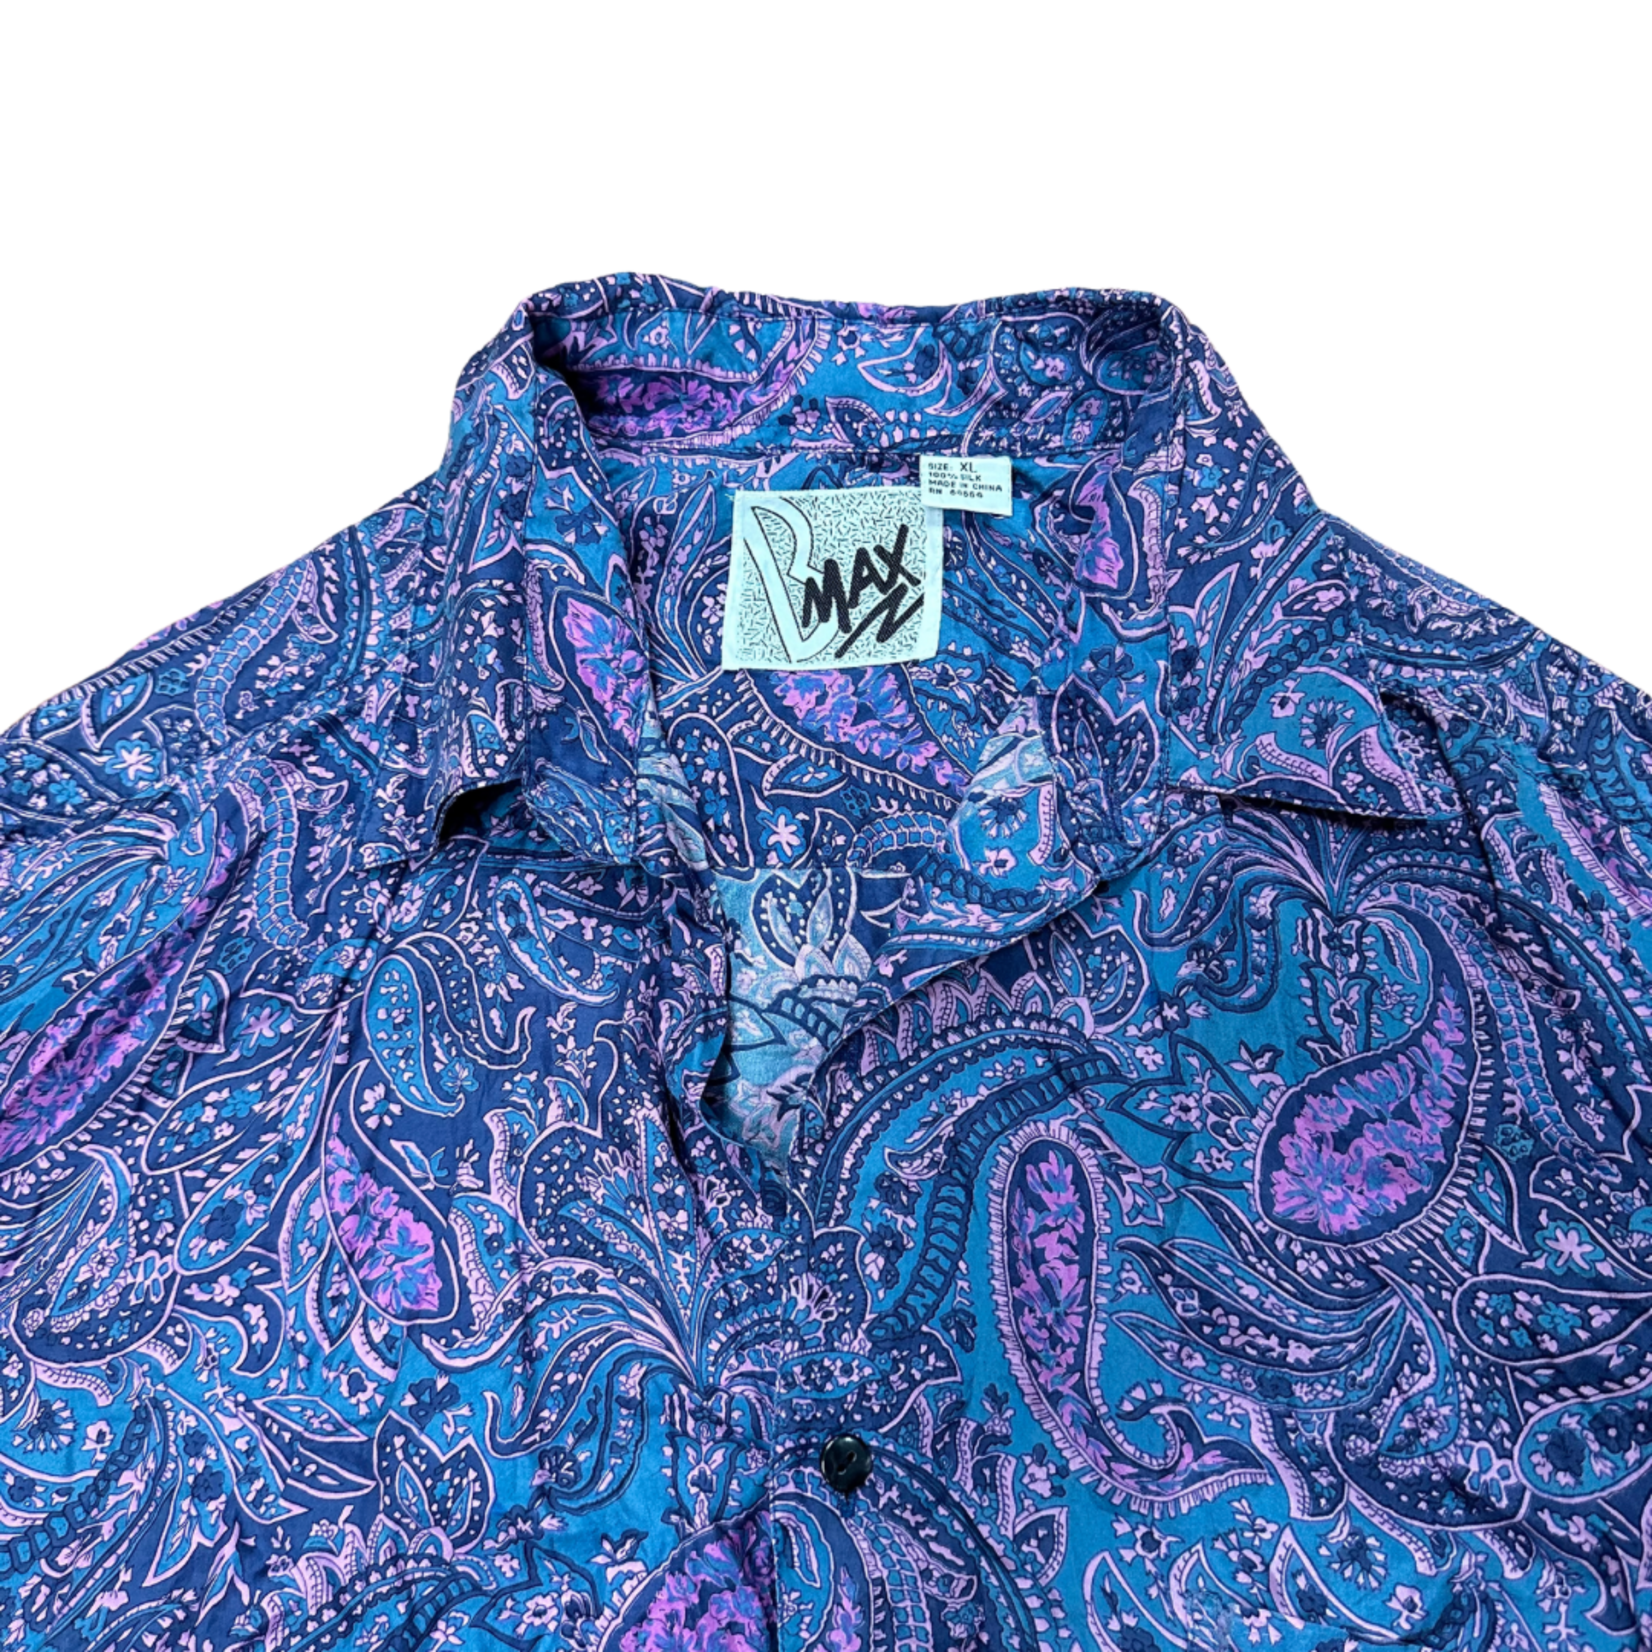 Mission Zero Men's Vintage Shirt - Bmax- 100% Silk Paisley Long Sleeve -XLarge *missing one top button*